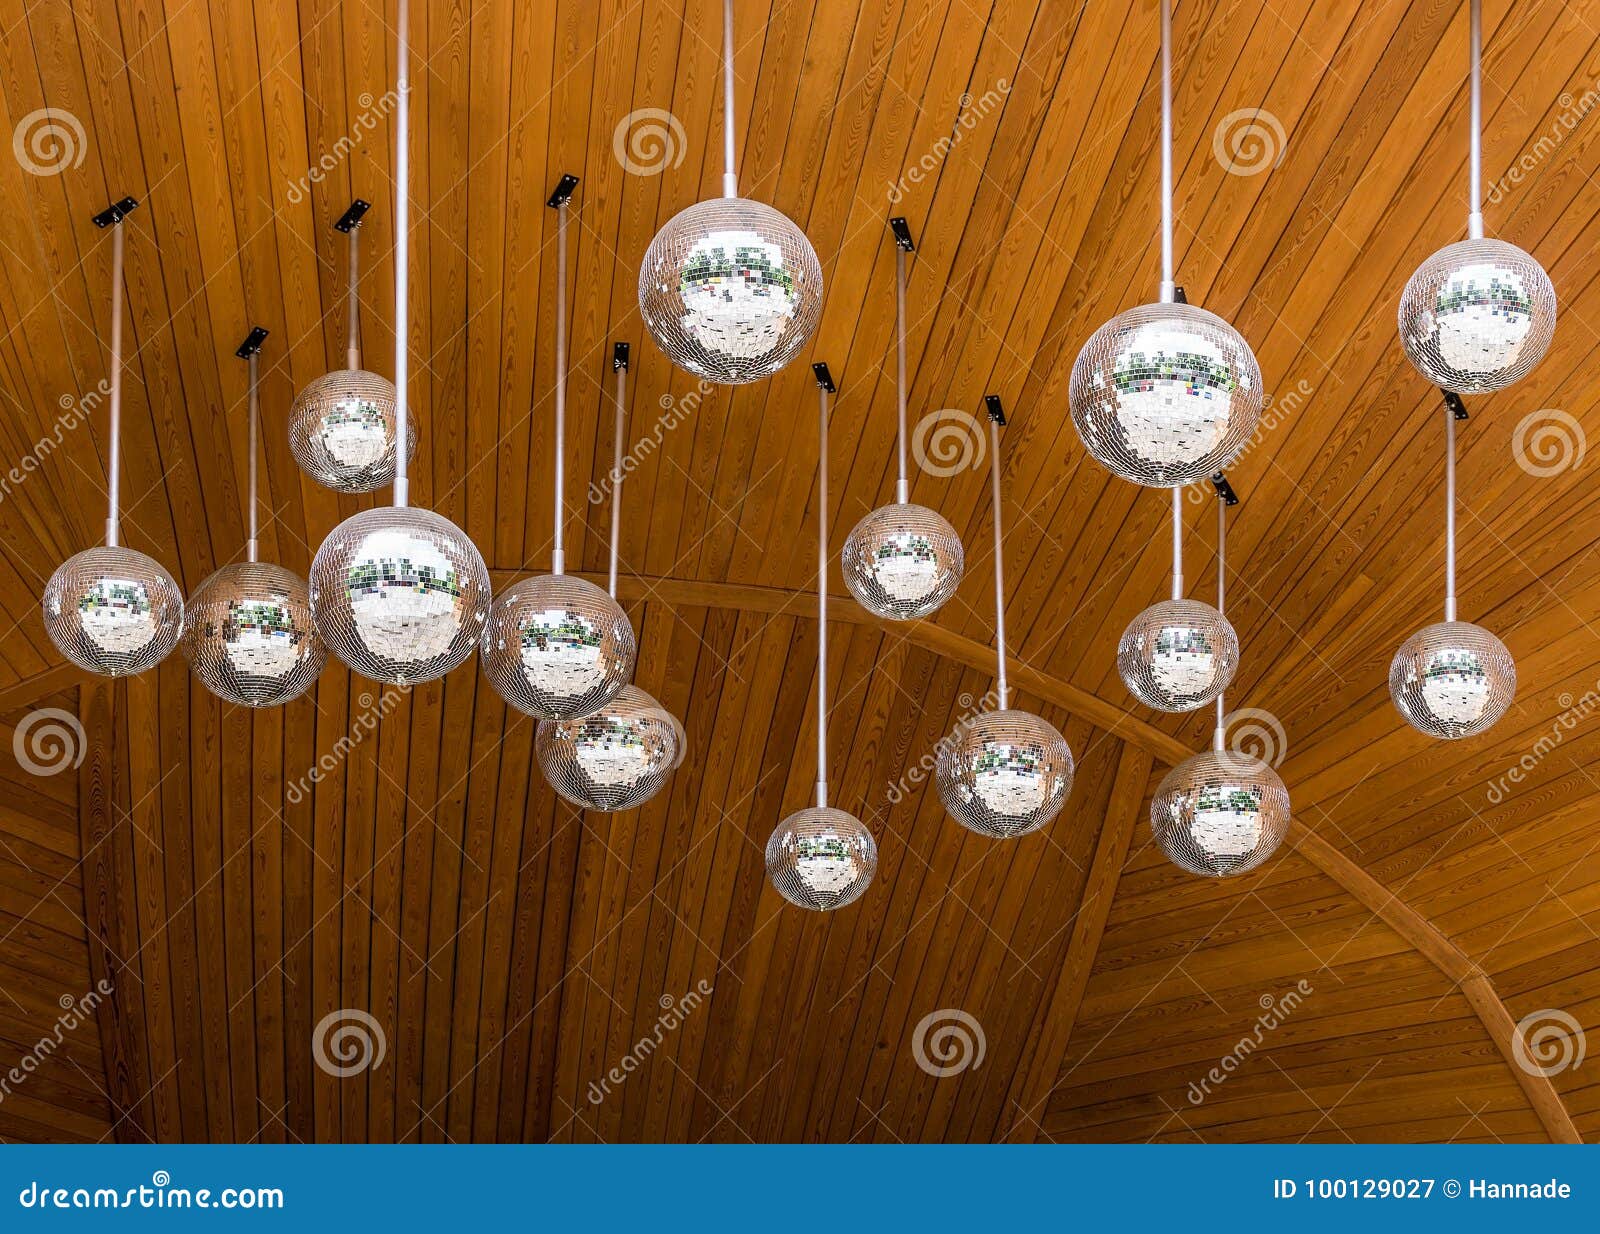 Mirrorballs On Wooden Ceiling Stock Image Image Of Silver